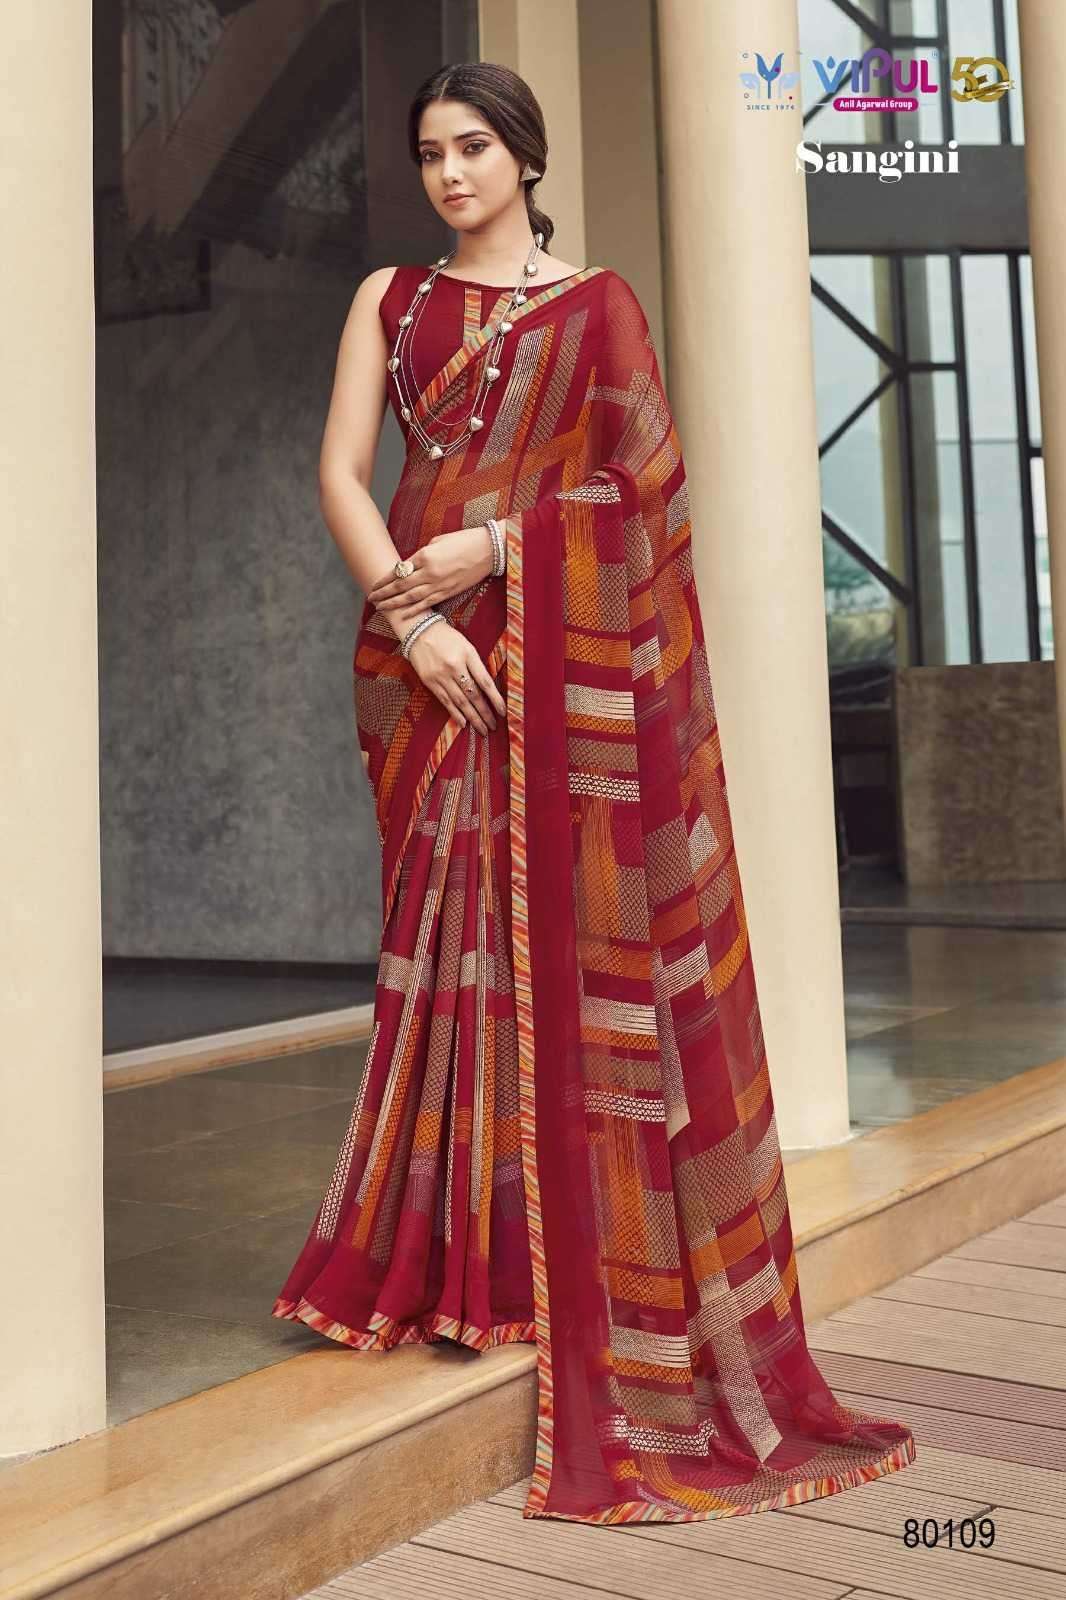 vipul sangini georgette saree wholesale price for resale bussiness